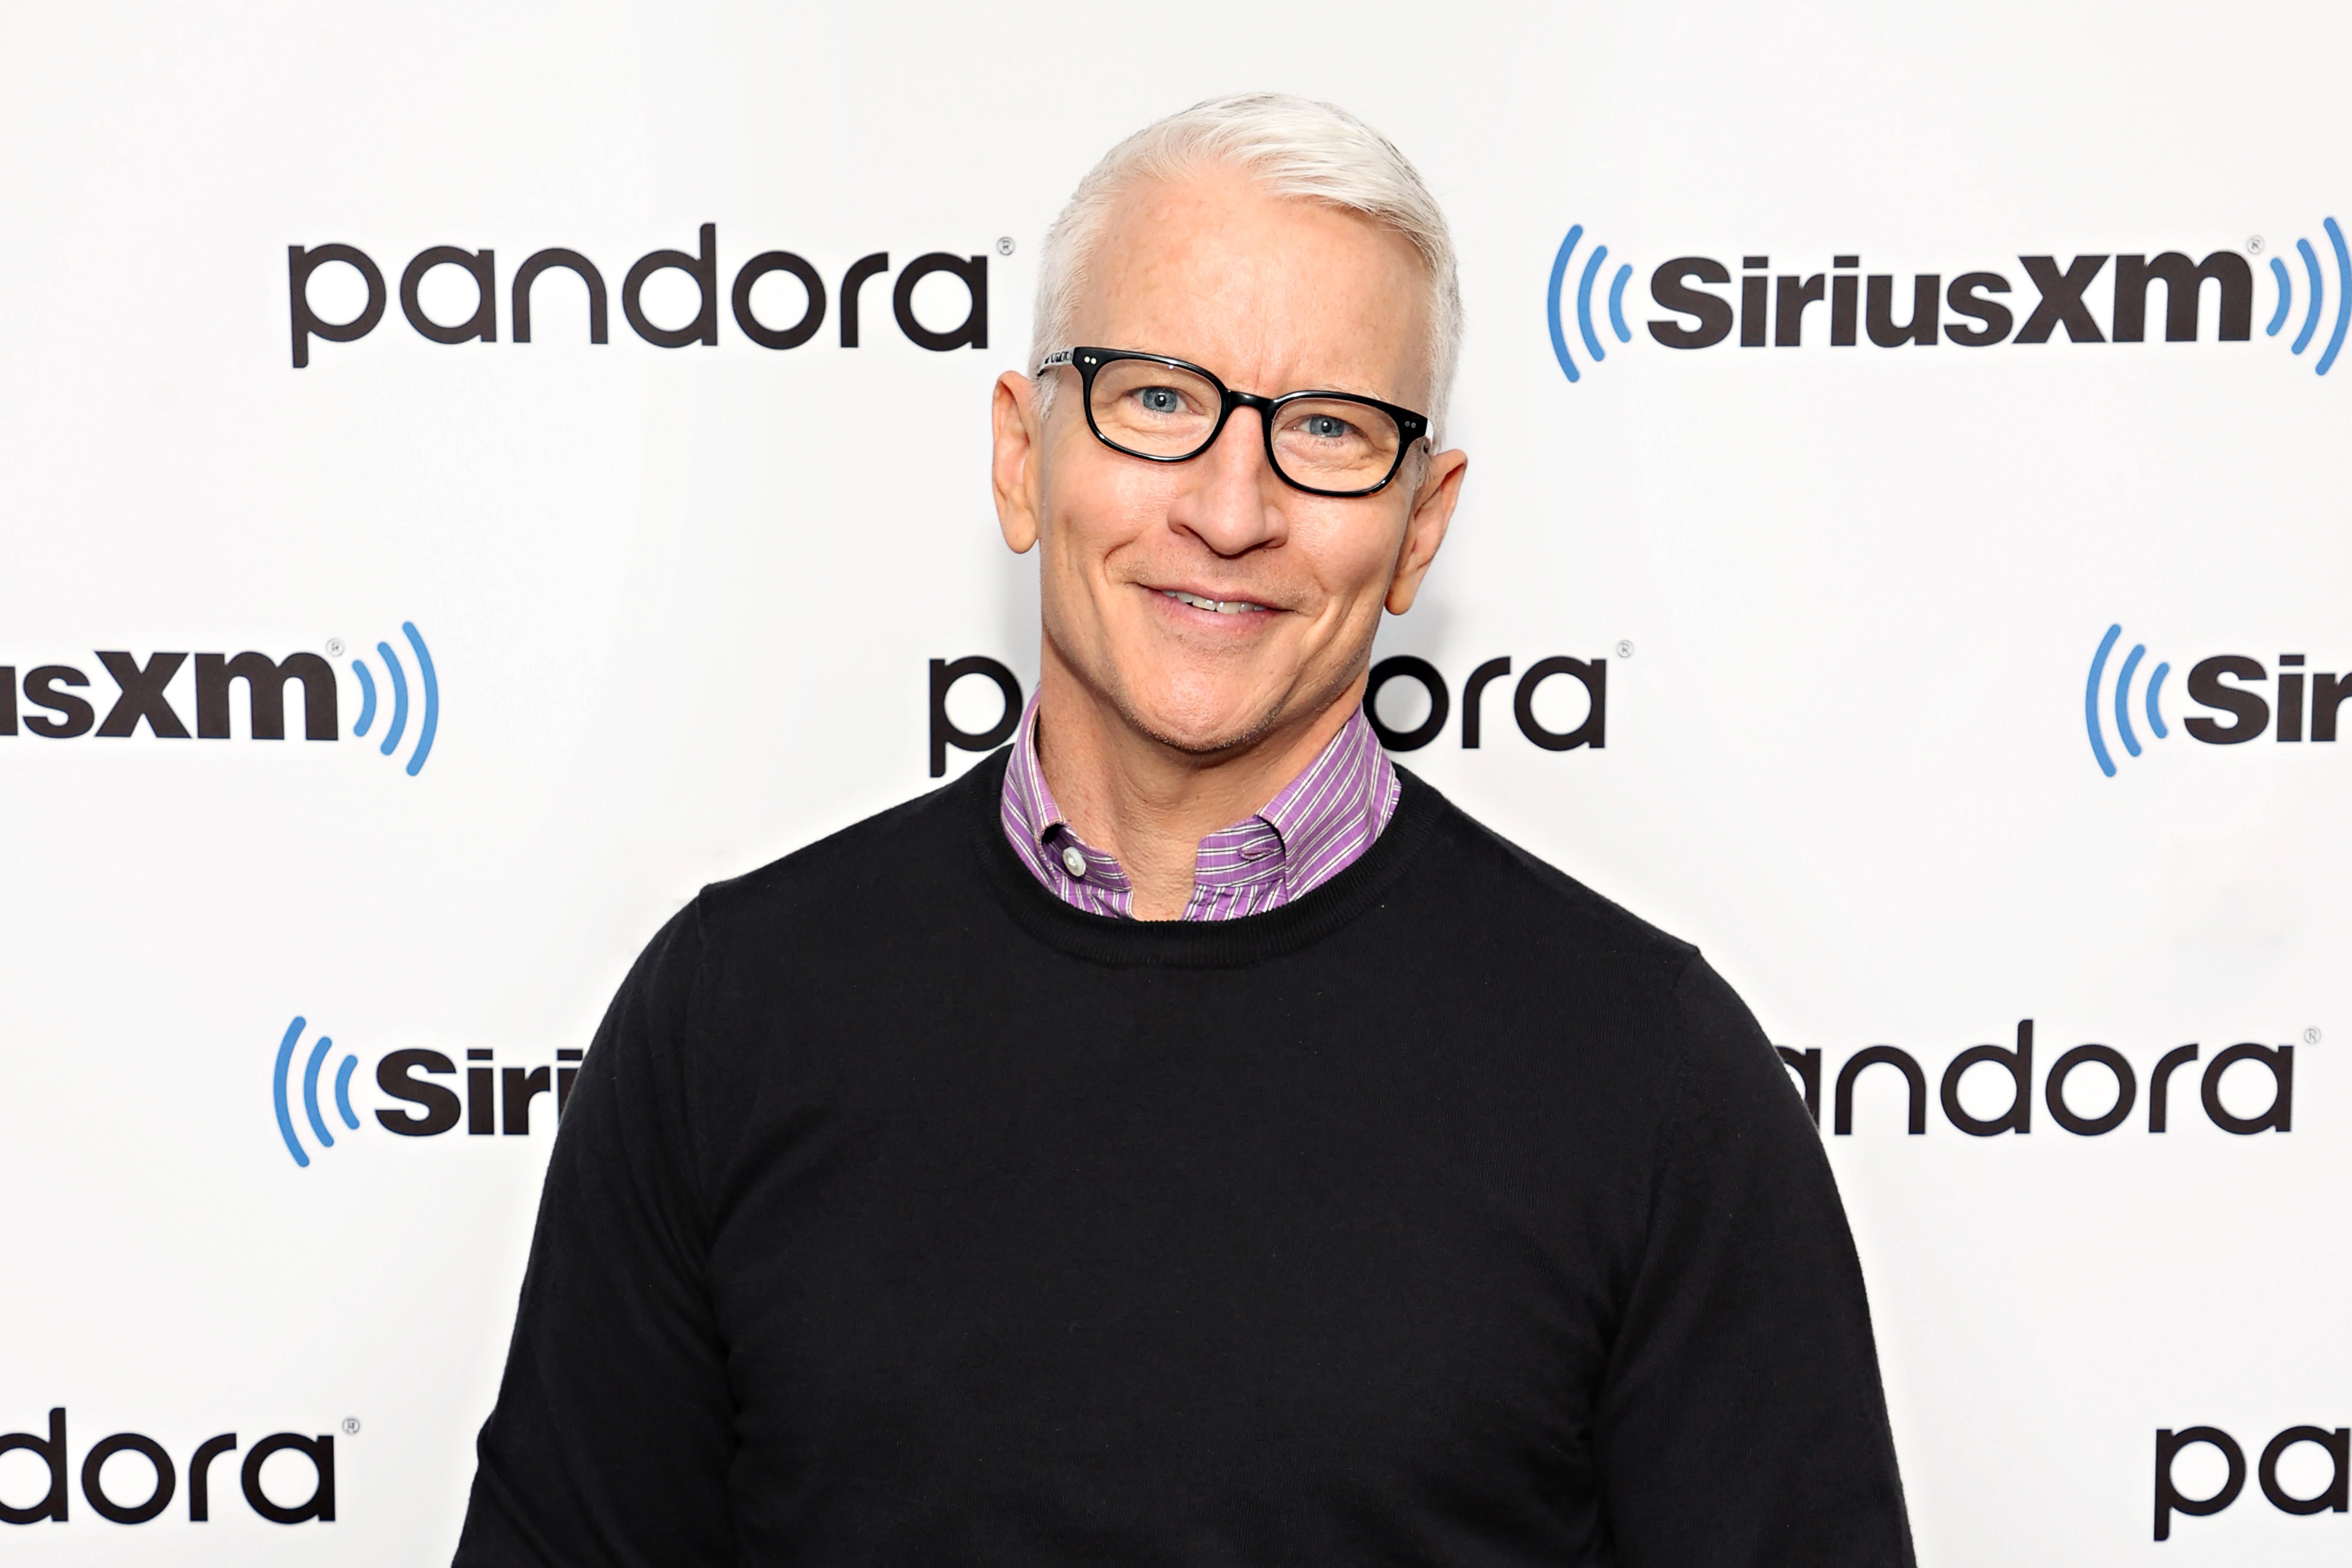 Anderson Cooper won't leave his fortune to his son: Why 'I don't believe in passing on huge amounts of money' - CNBC